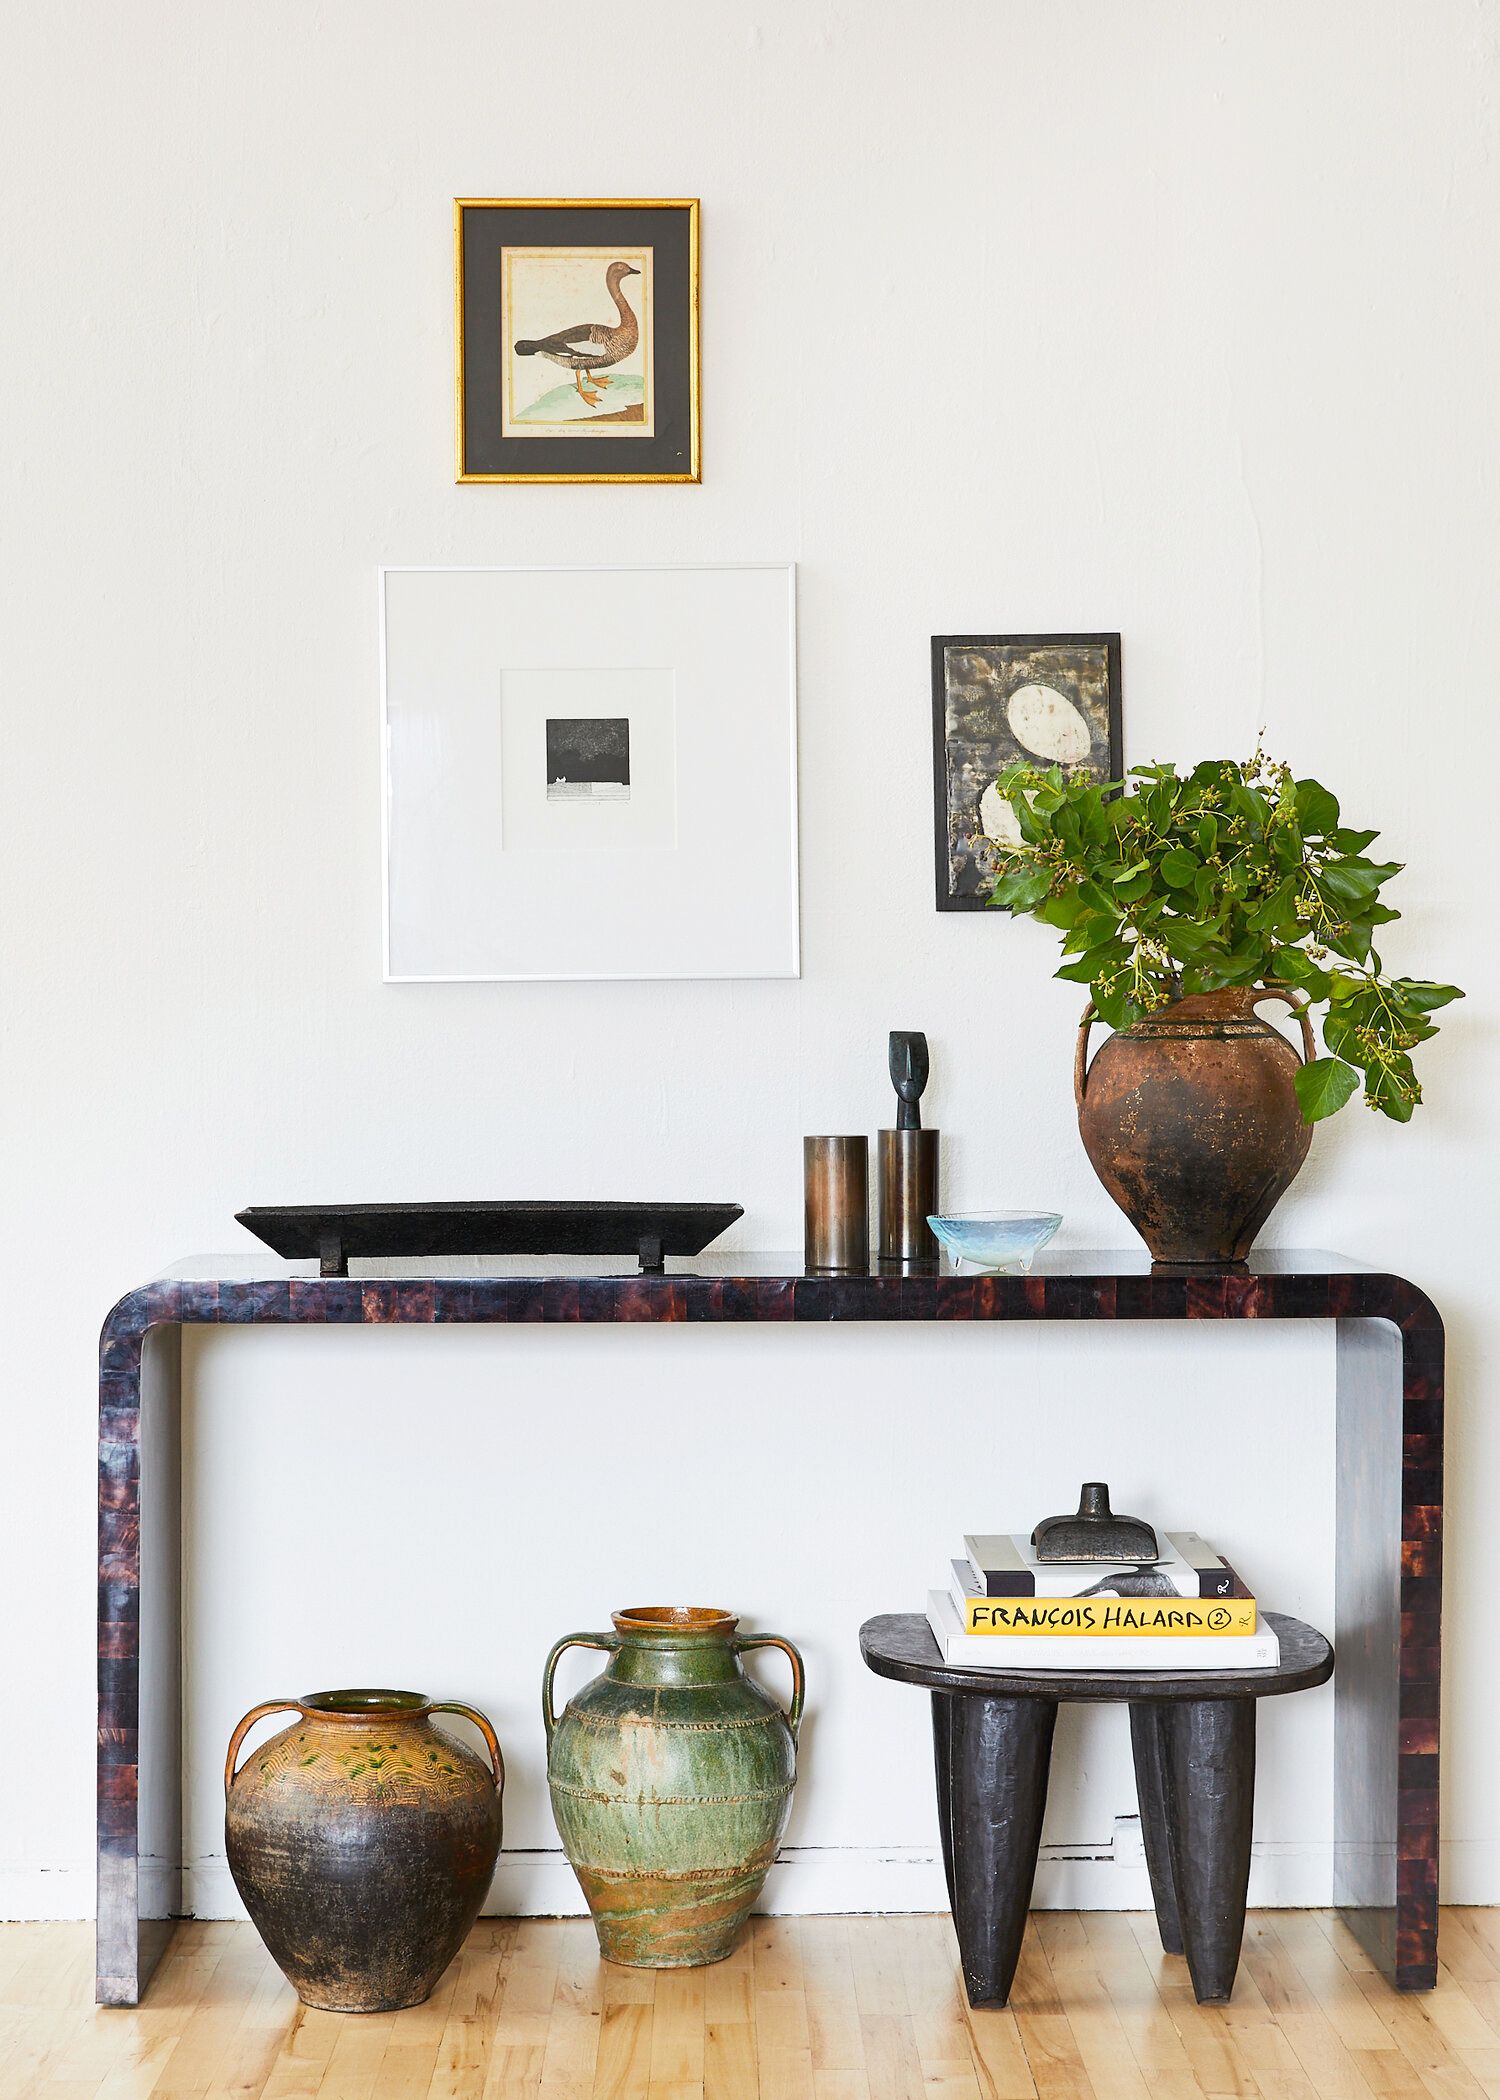 18 Console Table Decorating Ideas for Every Room In the House